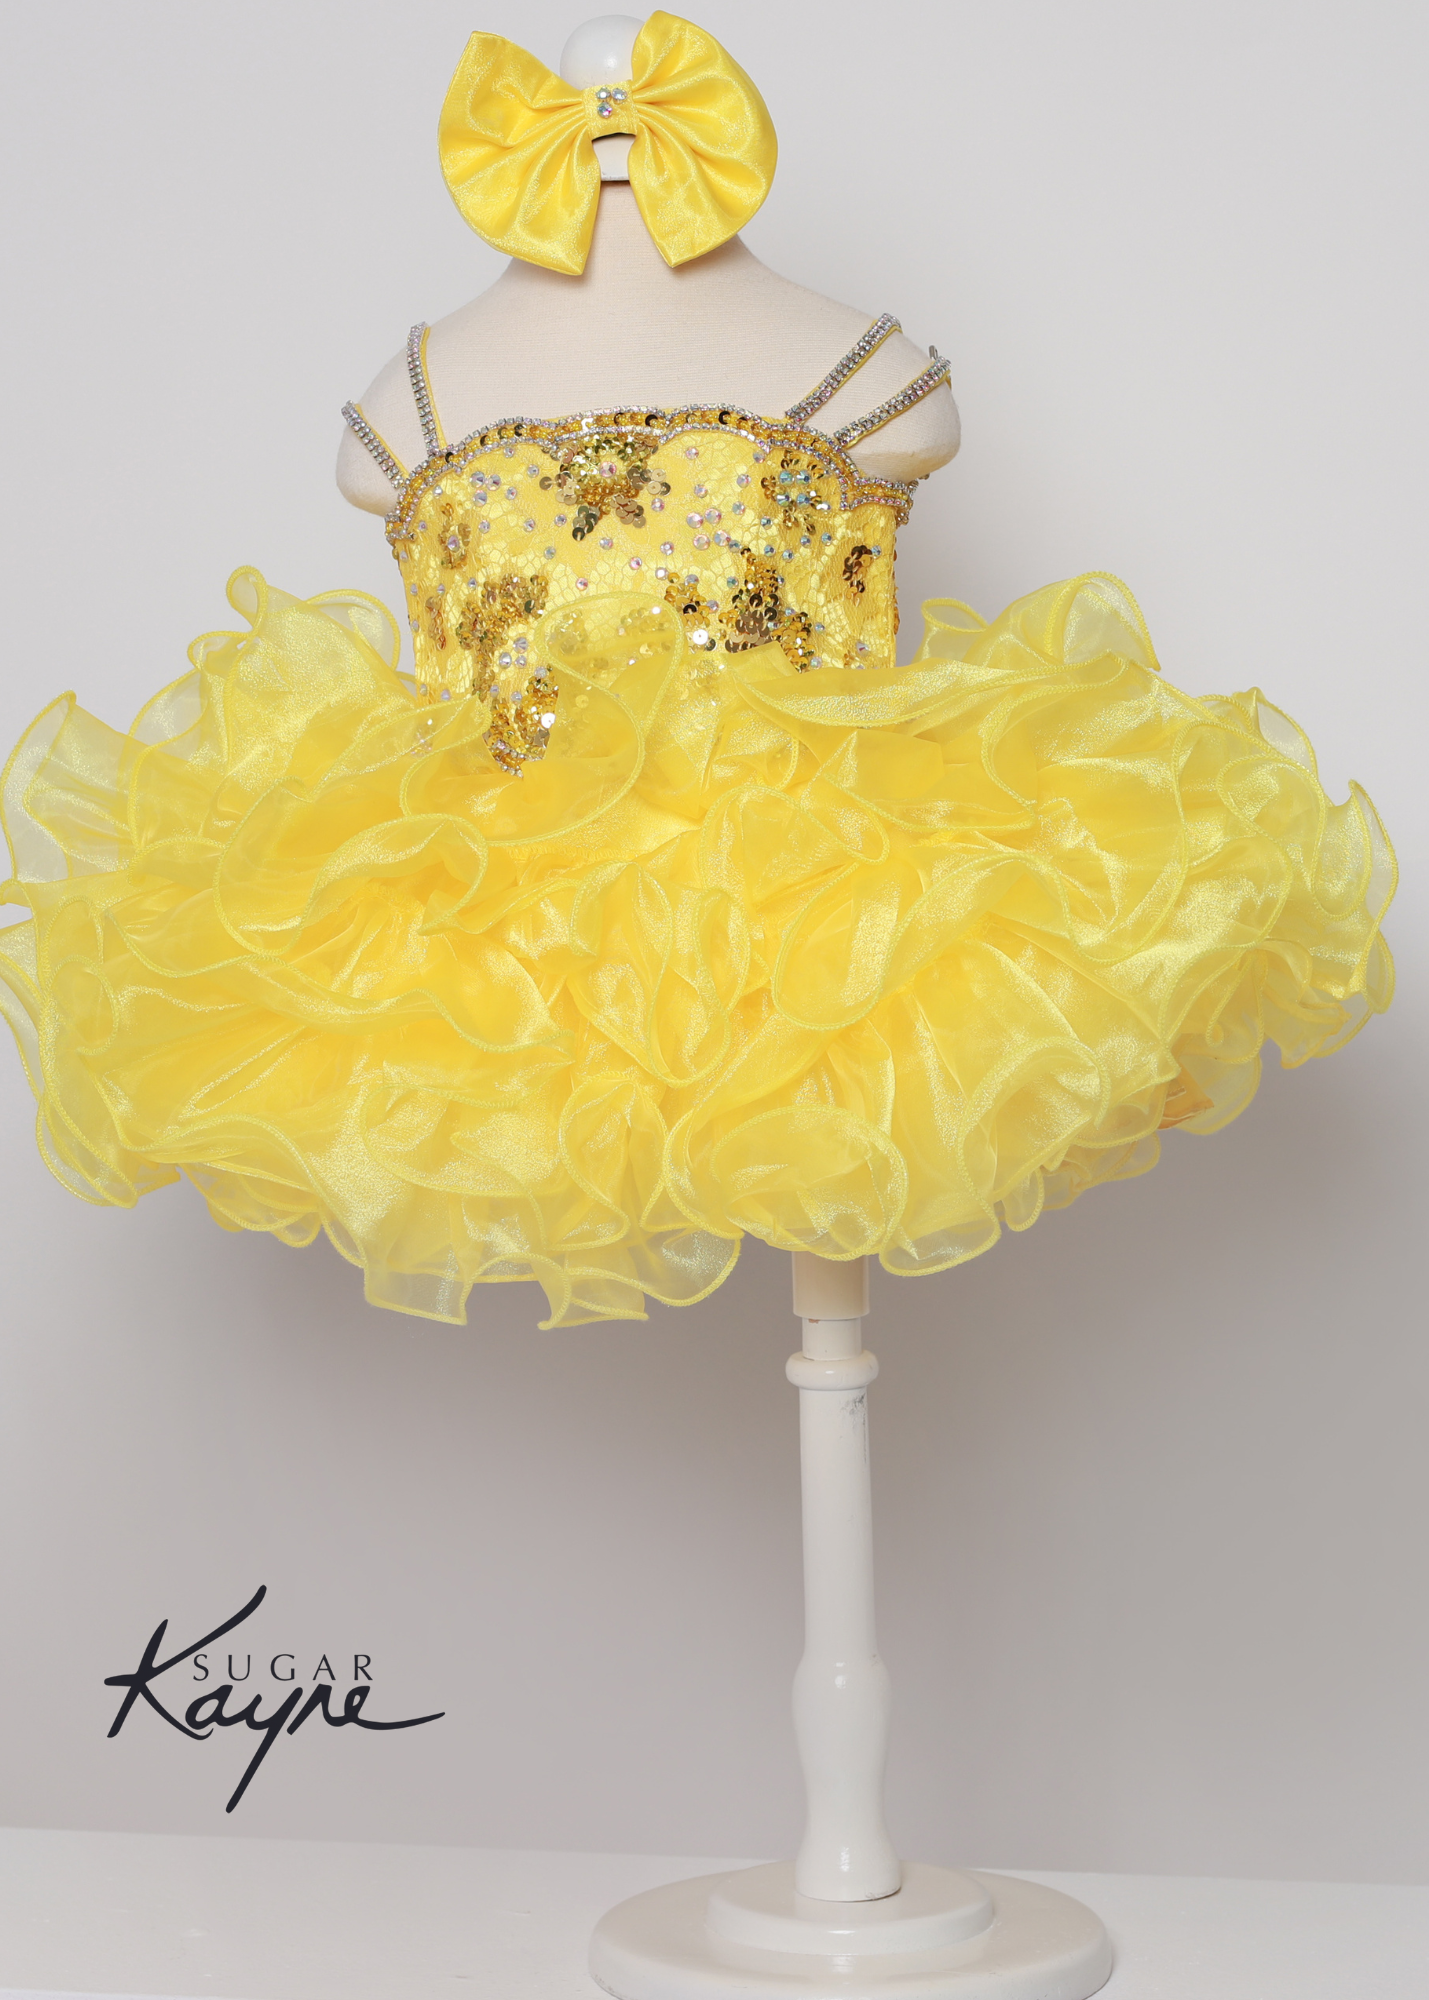 Sugar Kayne C225 Girls Baby Lace Sequin Crystal Cupcake Pageant Dress Ruffle Skirt Bow Corset.. Have your little cupcake bring on all the charm in this stunning organza and stretch lace gown. The corset back is the perfect addition as the little one grows!  Colors: Barbie Pink, Royal, Yellow, White  Sizes: 0M, 12M, 18M, 24M, 2T, 3T, 4T, 5T, 6M, 6T  Fabric Organza, Stretch Lace, Satin Lining